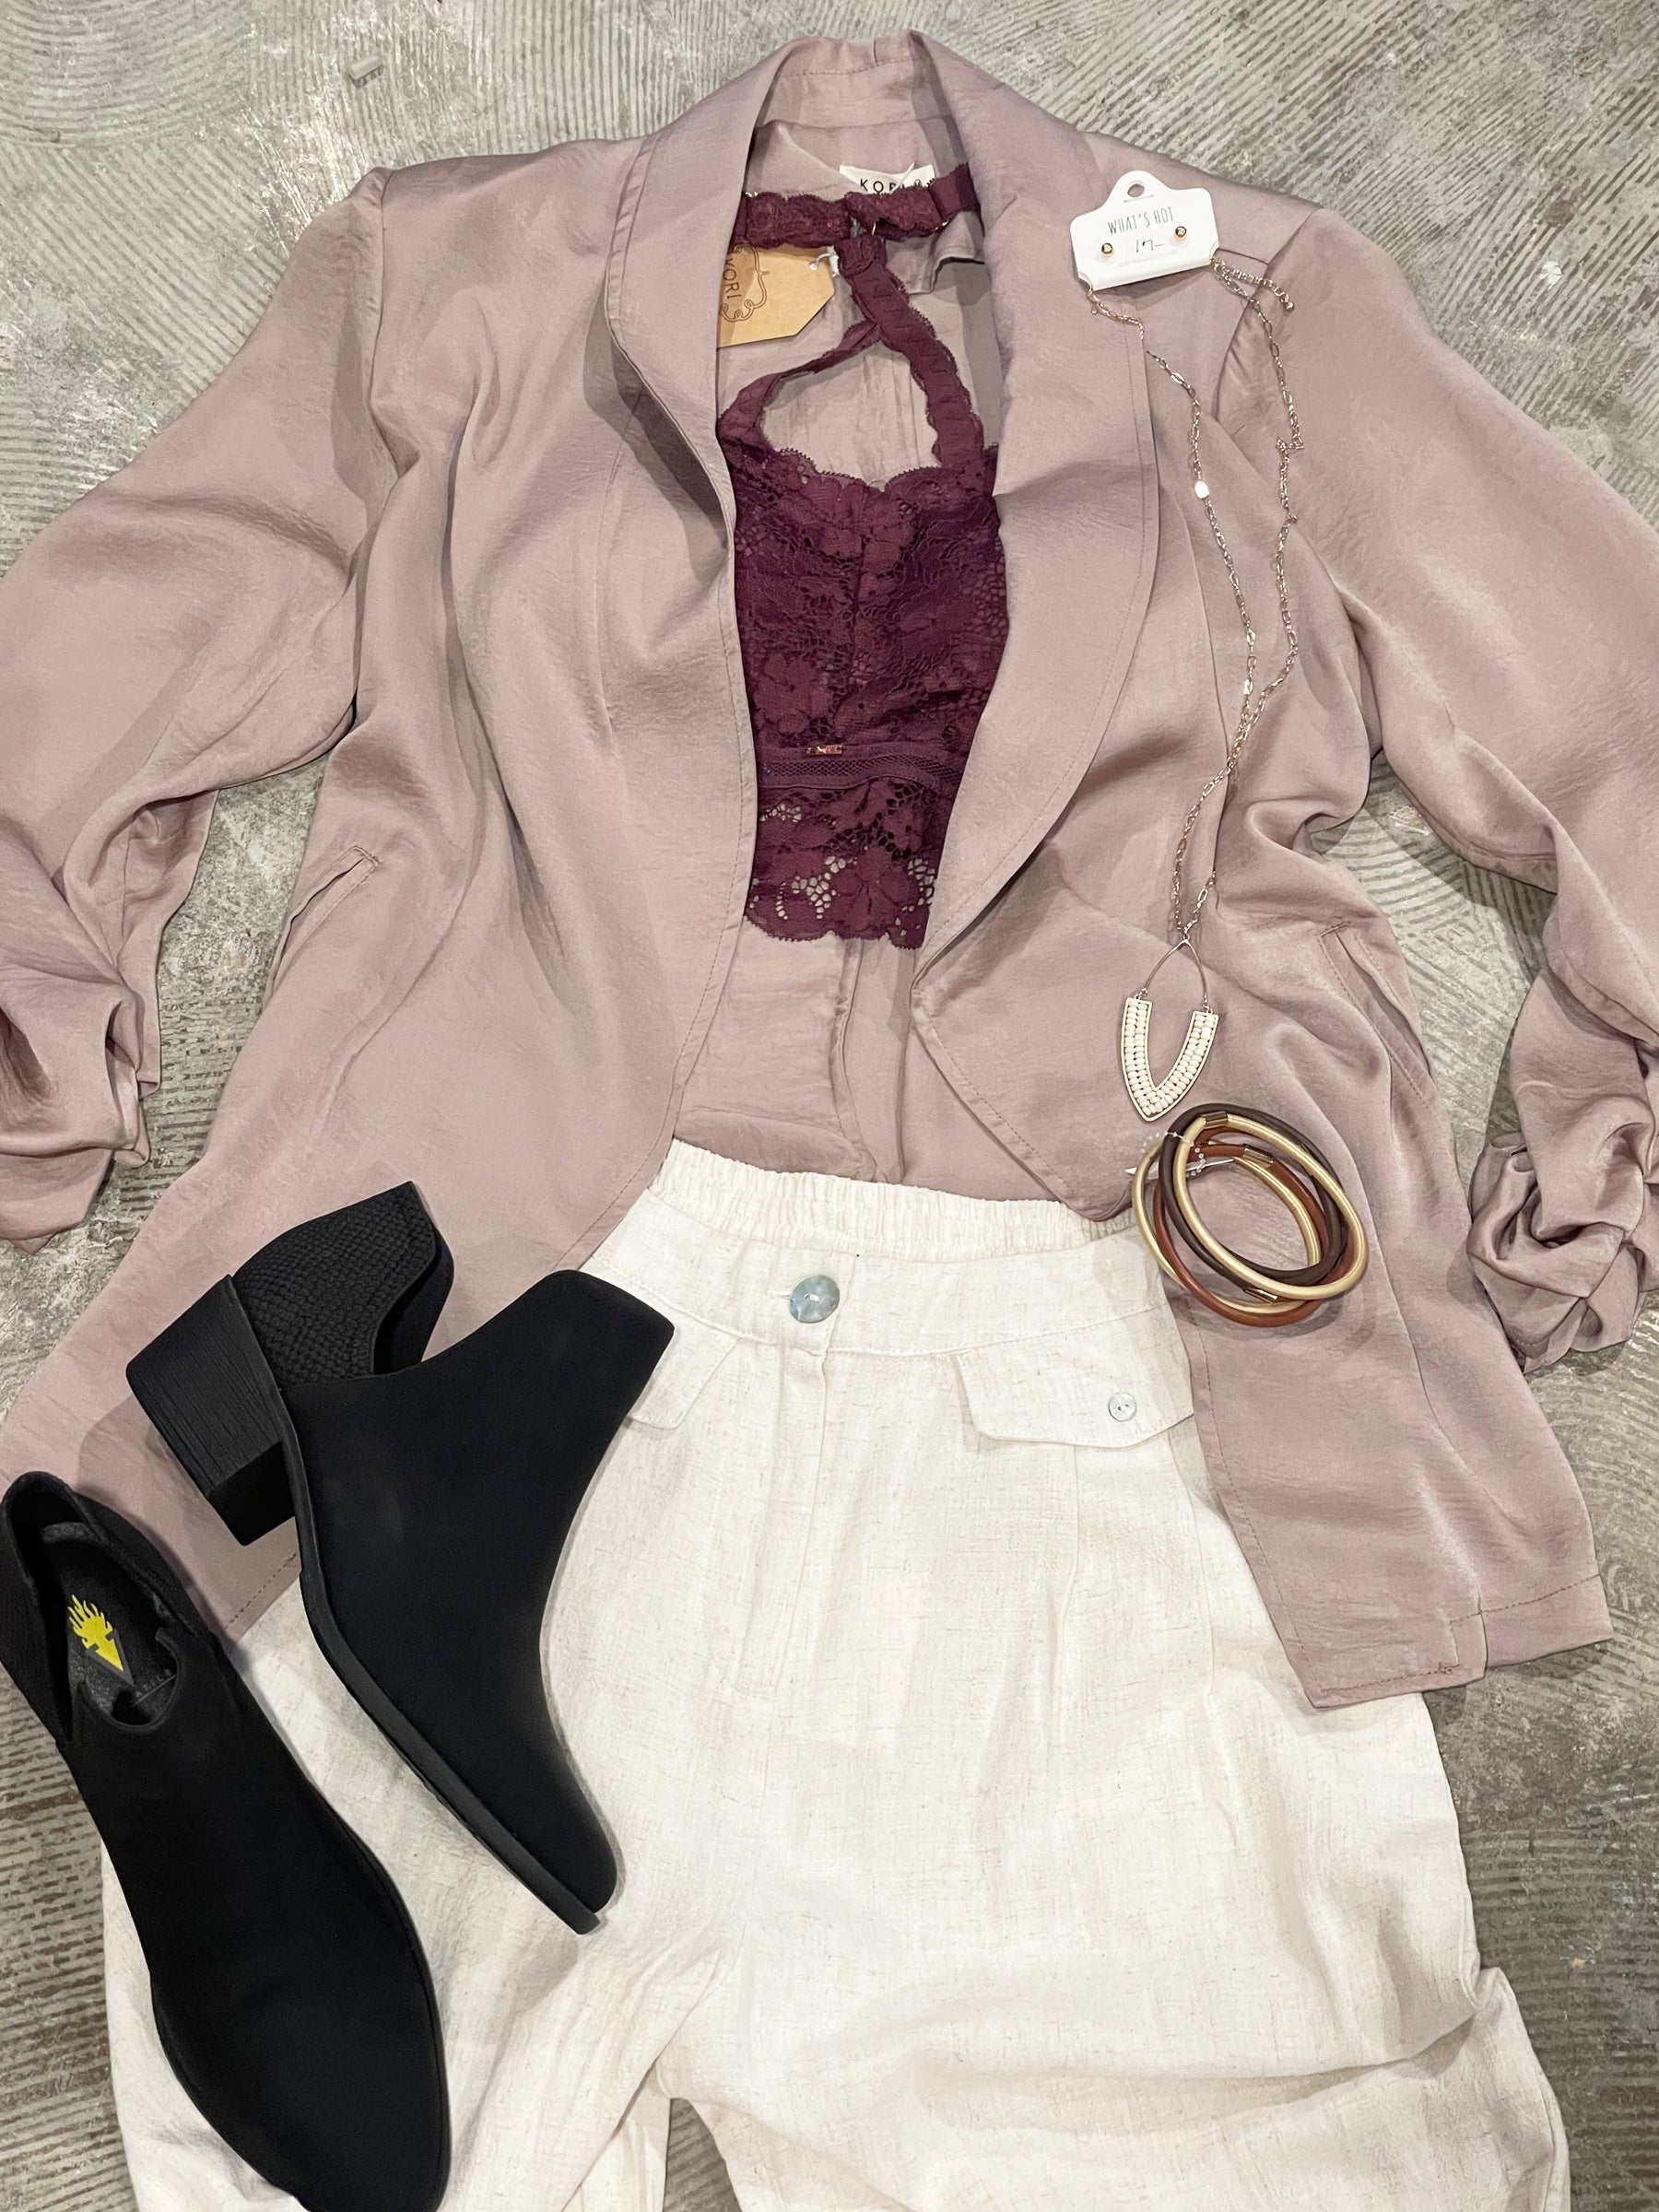 Cinch Sleeve Taupe Jacket Blazer by Kori This look expensive but looks are deceiving with this super stylish jacket! Pair it with your favorite bralette or blouse, you can't go wrong with the tailored style that is sleek and casual. The taupe color is champagne perfect. 100%  polyester.